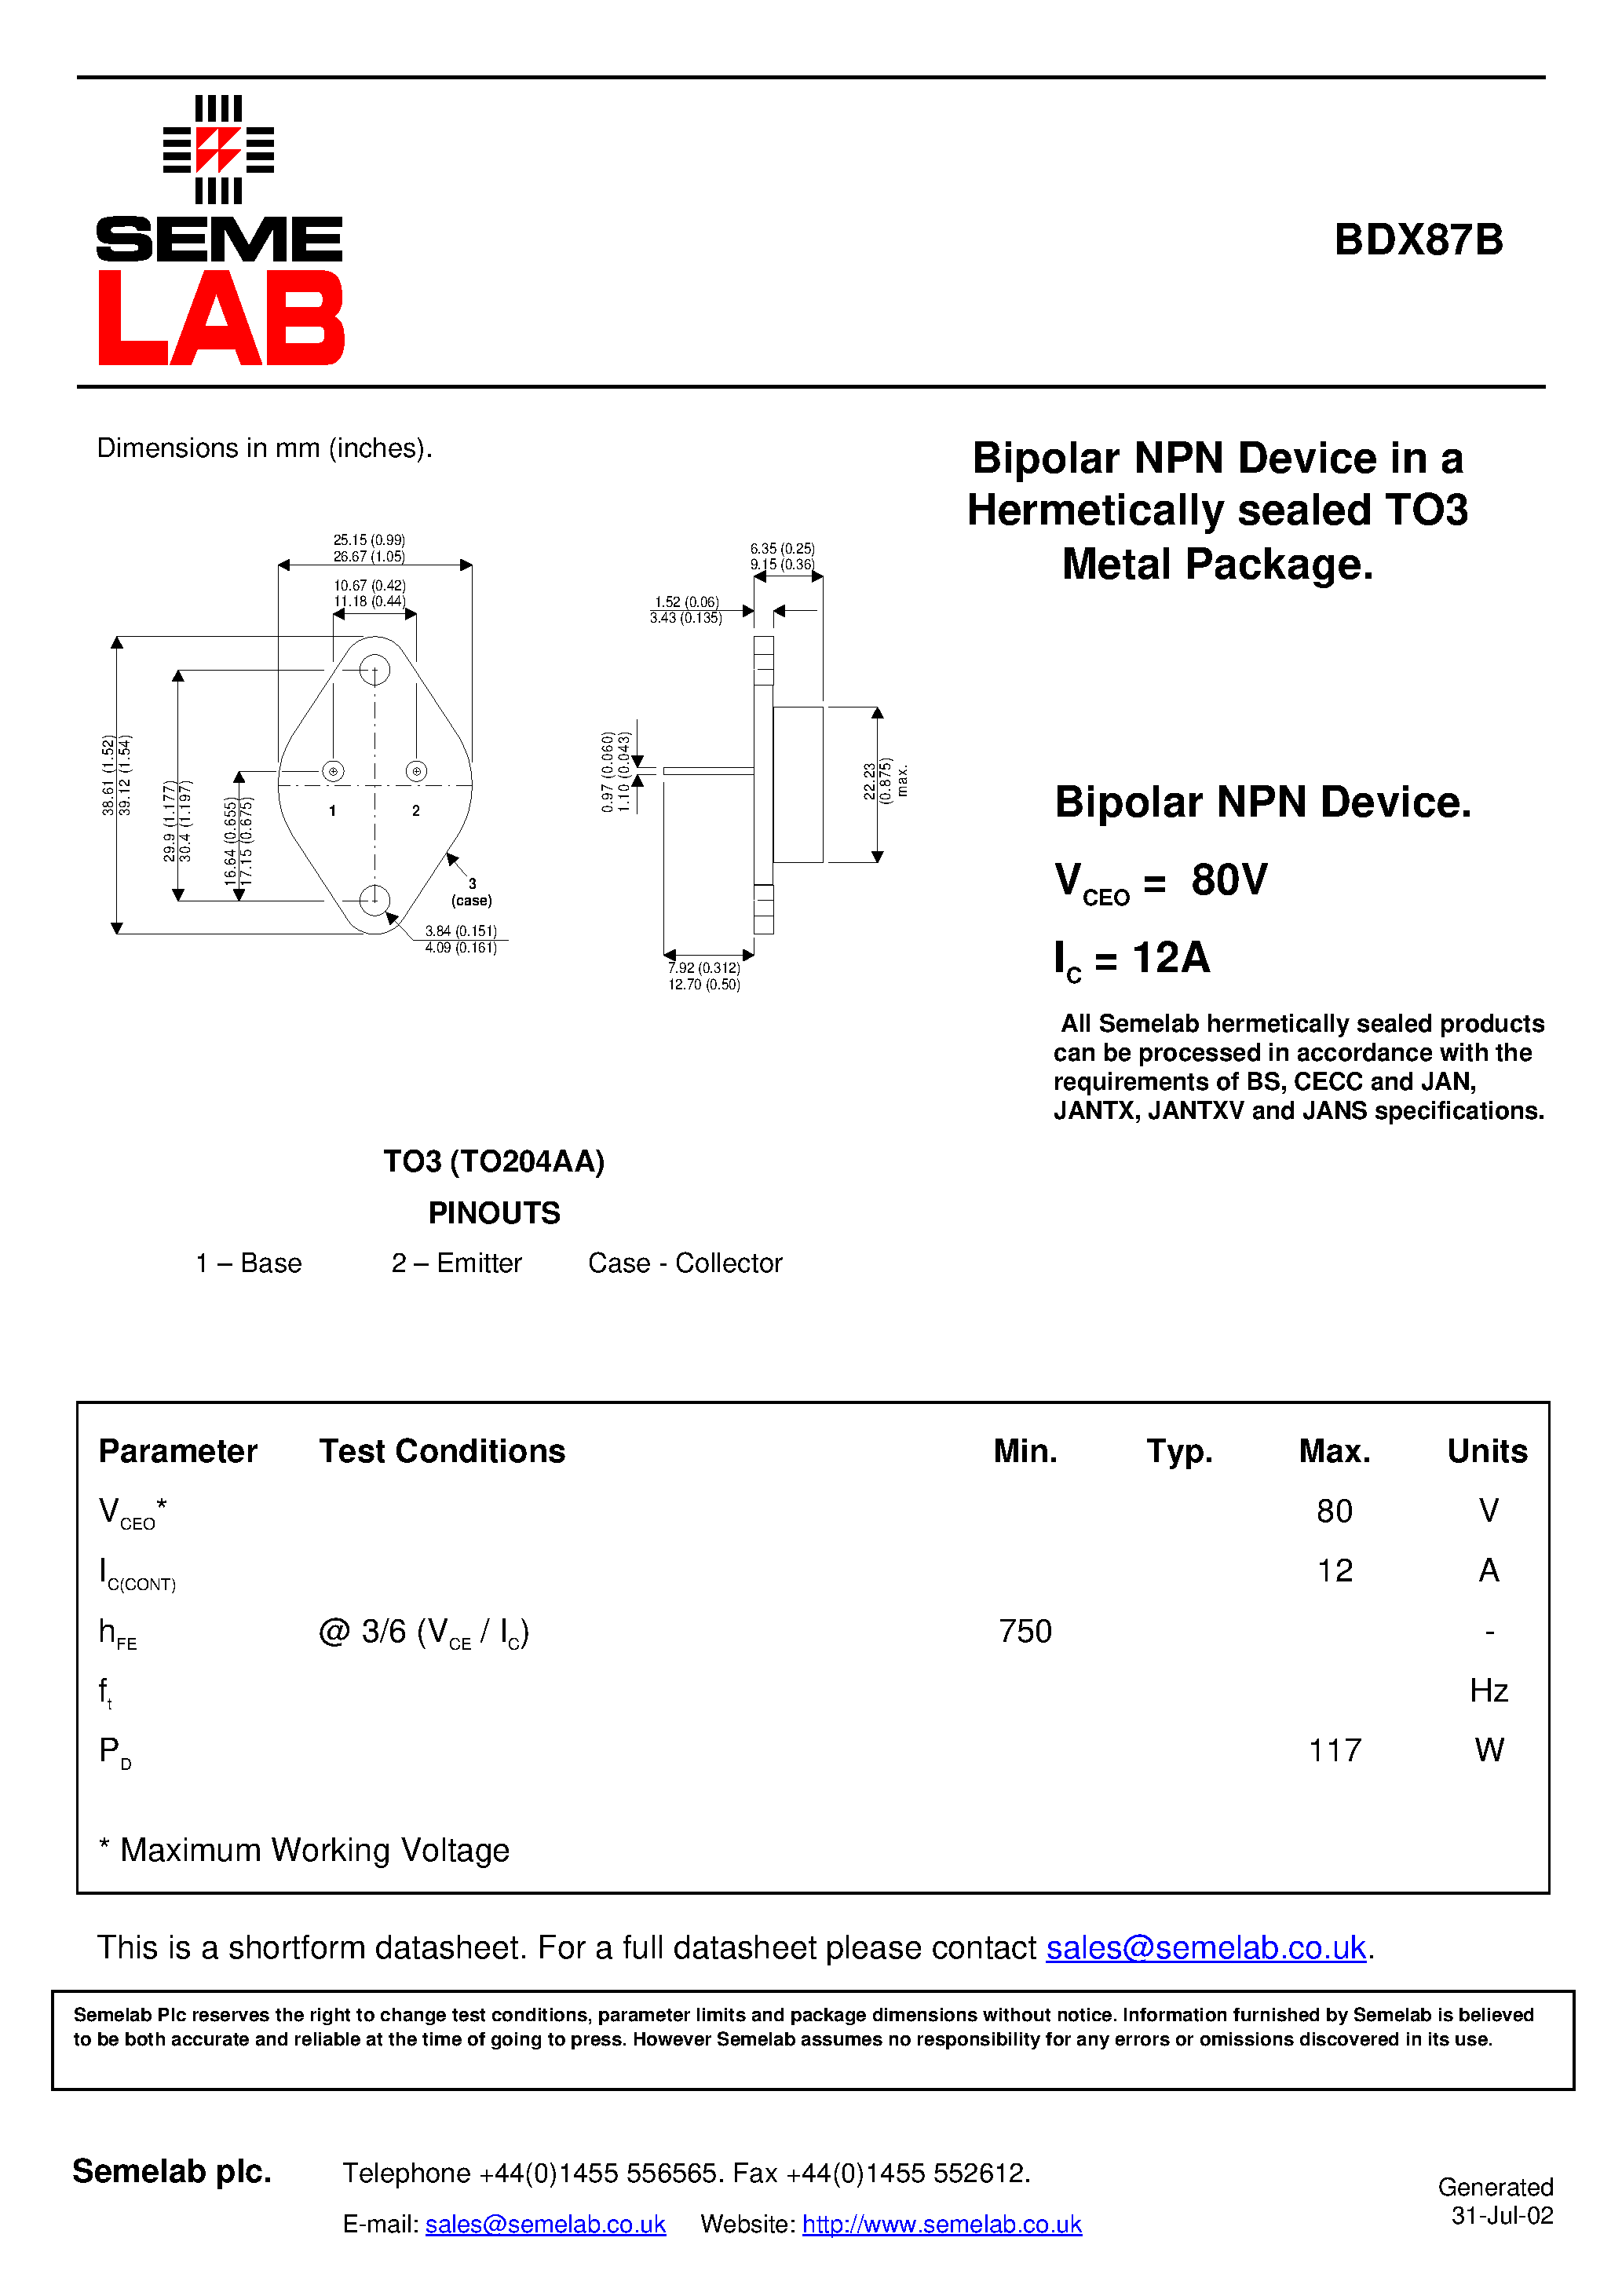 Datasheet BDX87B - Bipolar NPN Device in a Hermetically sealed TO3 Metal Package page 1